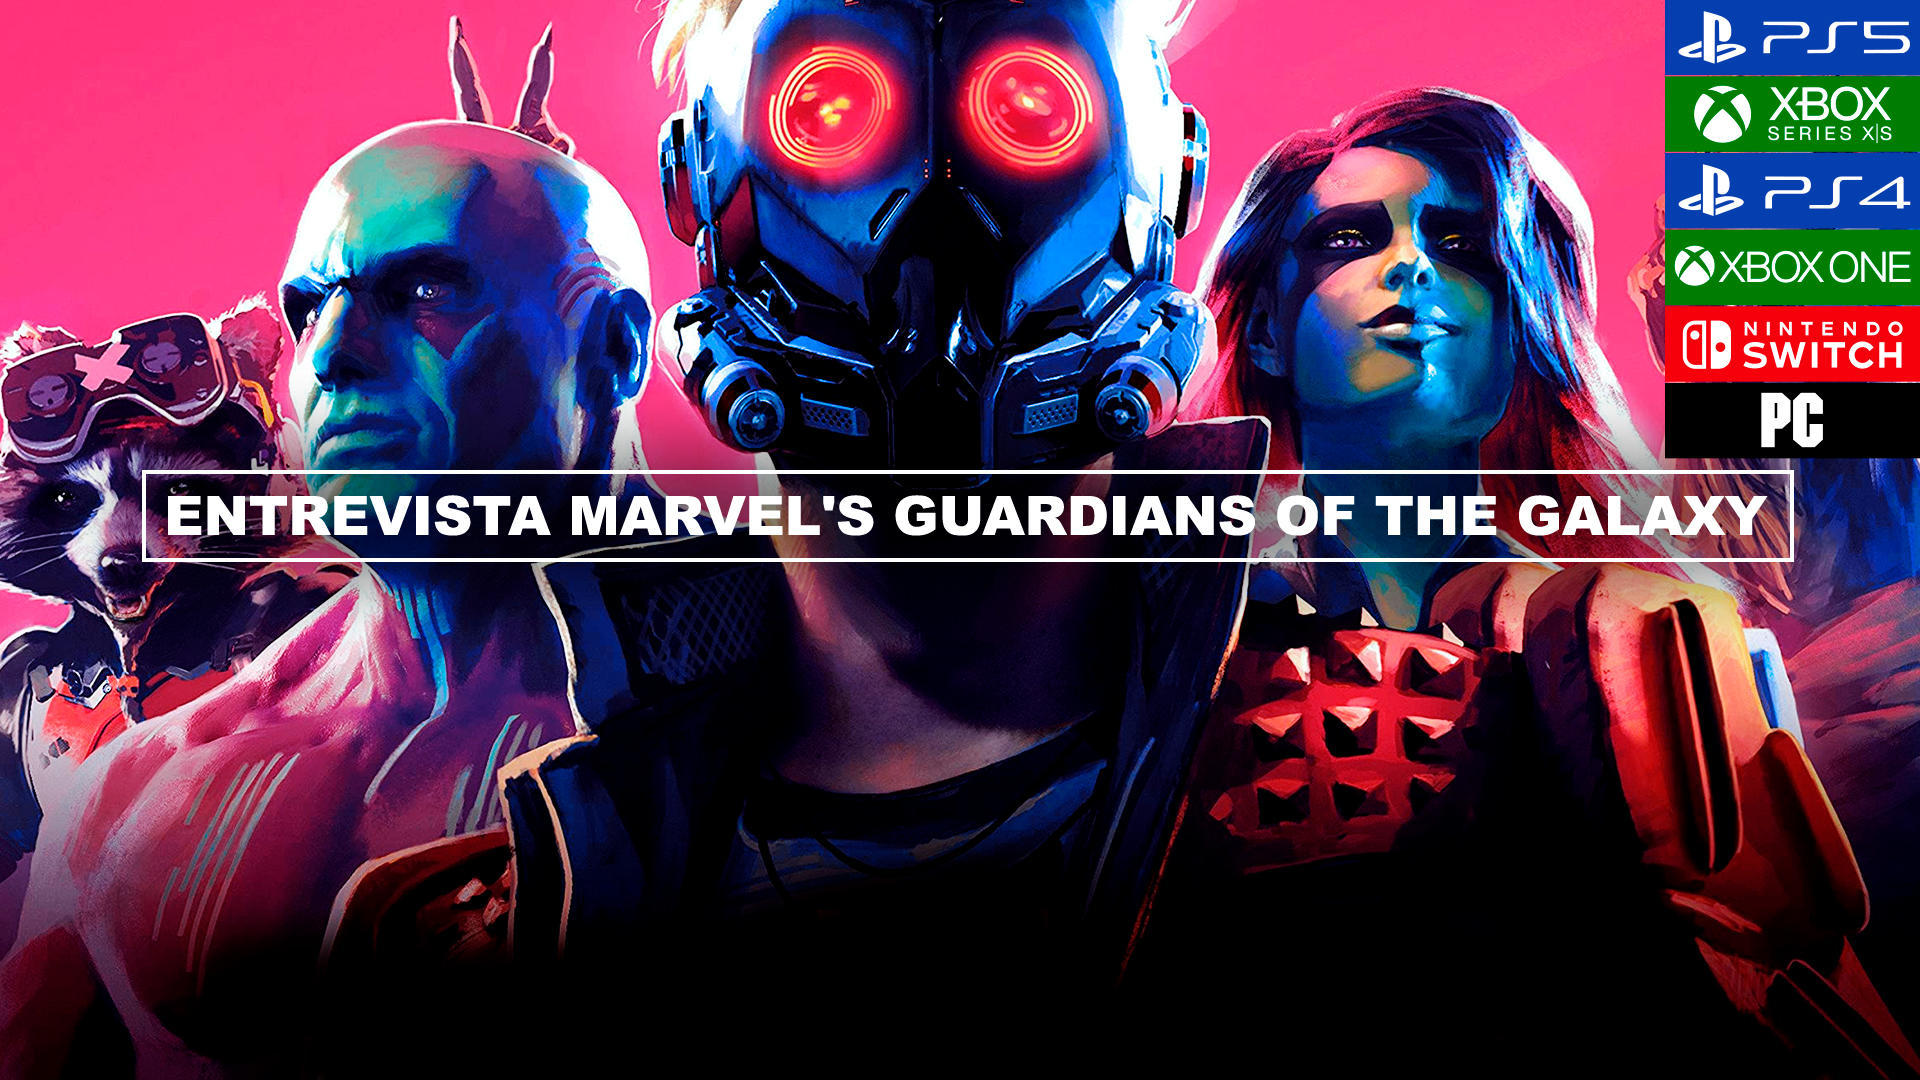 Entrevista Marvel's Guardians of the Galaxy